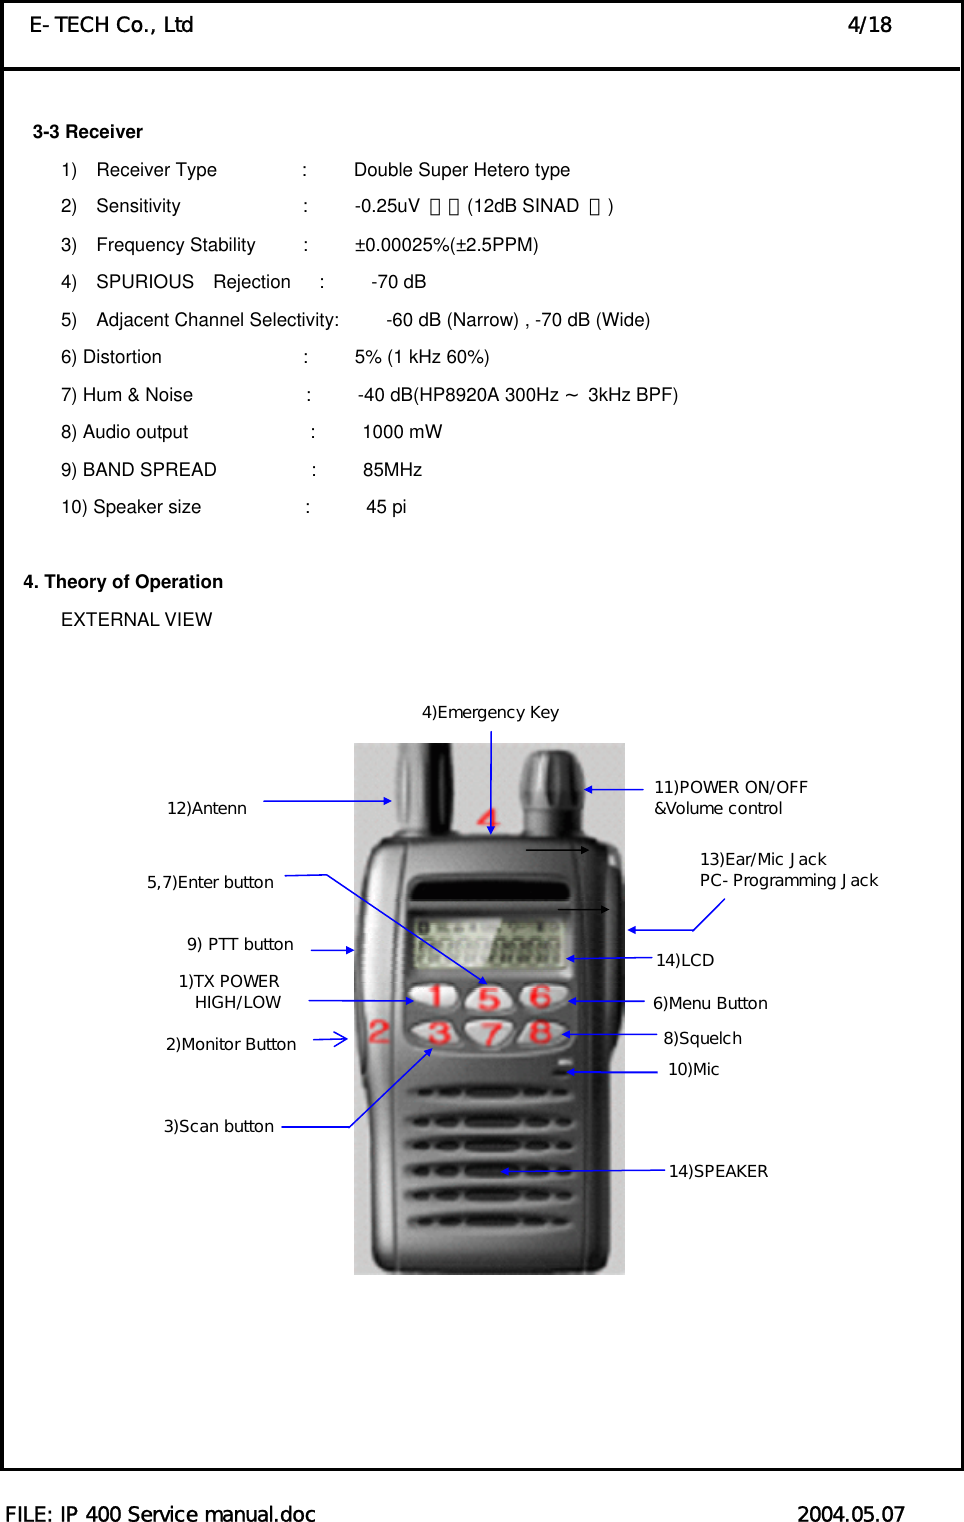  FILE: IP 400 Service manual.doc                                               2004.05.07 E-TECH Co., Ltd                                                                4/18    3-3 Receiver       1)  Receiver Type         :     Double Super Hetero type       2)  Sensitivity             :     -0.25uV 이하(12dB SINAD  시)       3)  Frequency Stability     :     ±0.00025%(±2.5PPM)       4)  SPURIOUS  Rejection   :     -70 dB       5)  Adjacent Channel Selectivity:     -60 dB (Narrow) , -70 dB (Wide)       6) Distortion               :     5% (1 kHz 60%)       7) Hum &amp; Noise            :     -40 dB(HP8920A 300Hz   3kHz ～BPF)       8) Audio output             :     1000 mW       9) BAND SPREAD          :     85MHz       10) Speaker size           :      45 pi  4. Theory of Operation EXTERNAL VIEW          12)Antenn4)Emergency Key9) PTT button 10)Mic2)Monitor Button 14)LCD1)TX POWER HIGH/LOW 3)Scan button 8)Squelch 6)Menu Button 11)POWER ON/OFF &amp;Volume control 13)Ear/Mic Jack PC-Programming Jack 14)SPEAKER 5,7)Enter button 